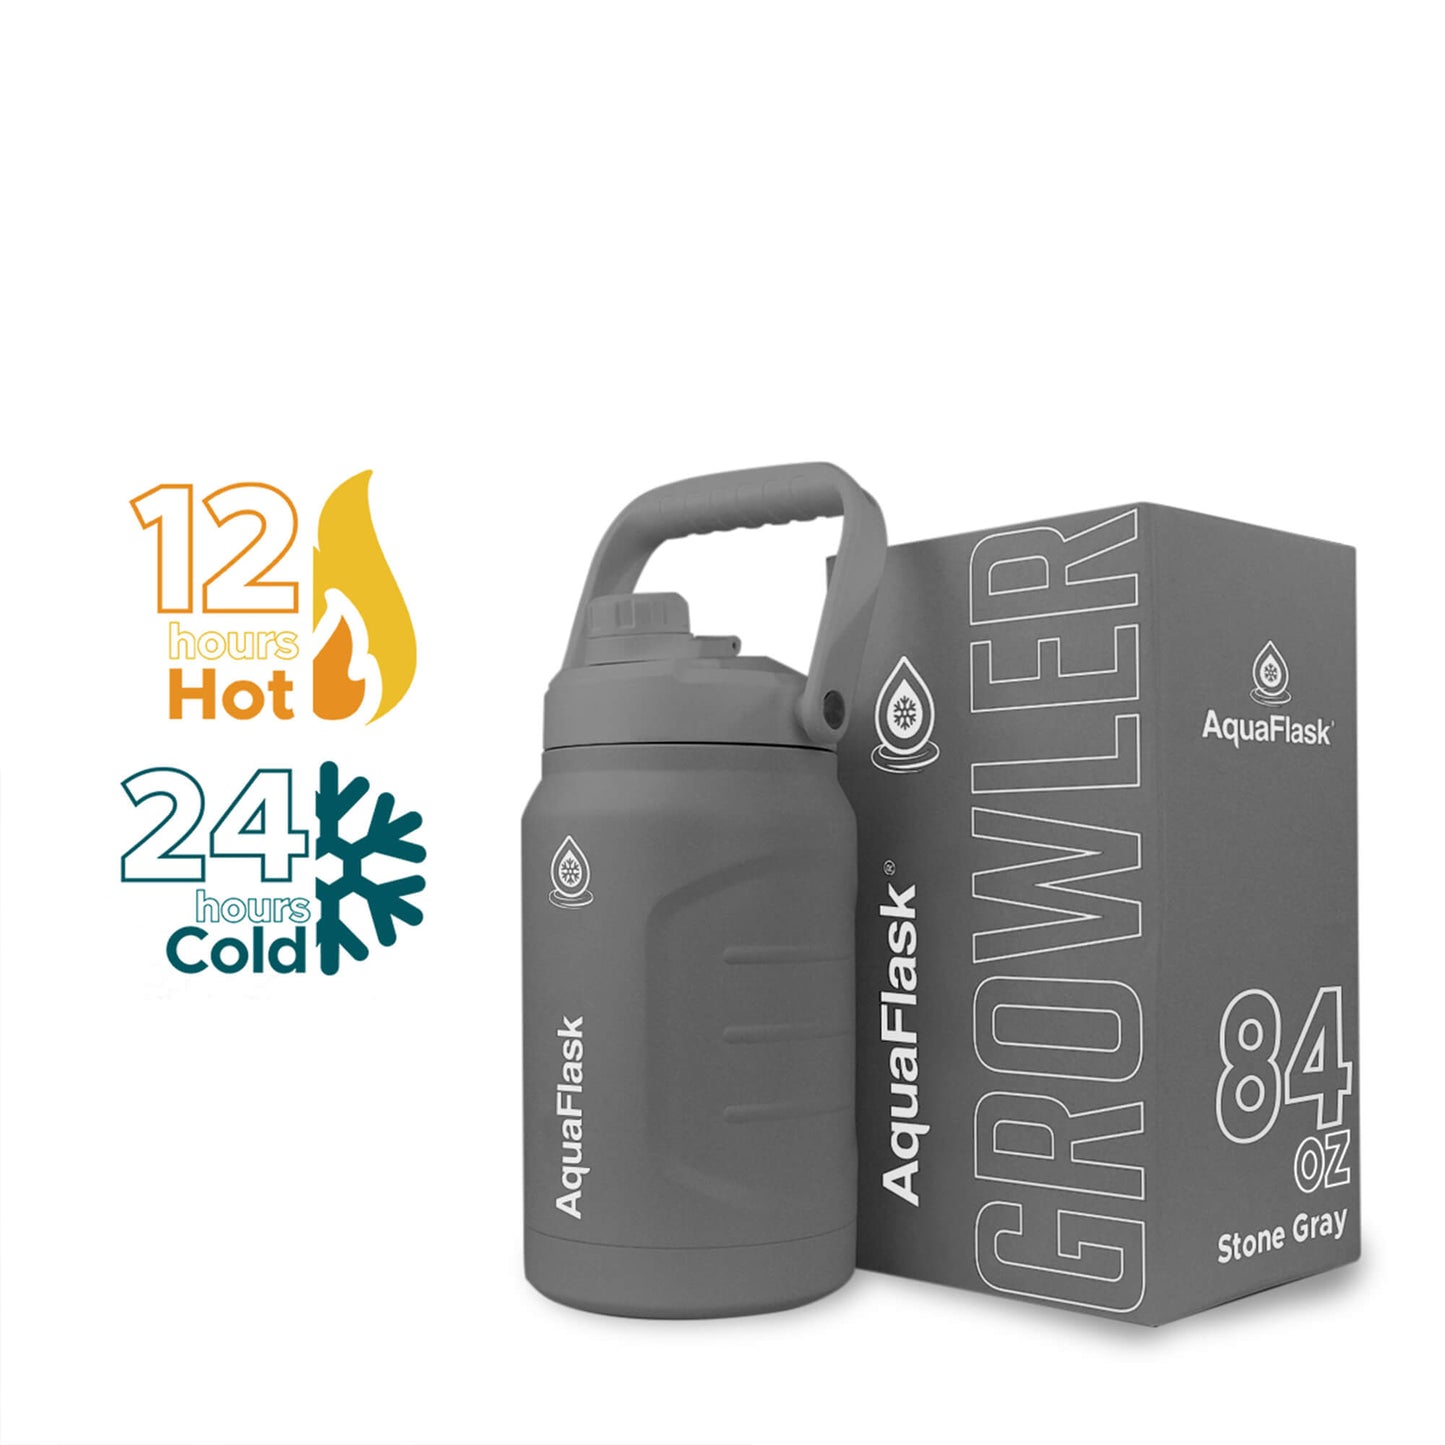 Aquaflask Growler V2 Stainless Steel Vacuum  Insulated Water Bottle 2.5L Jug